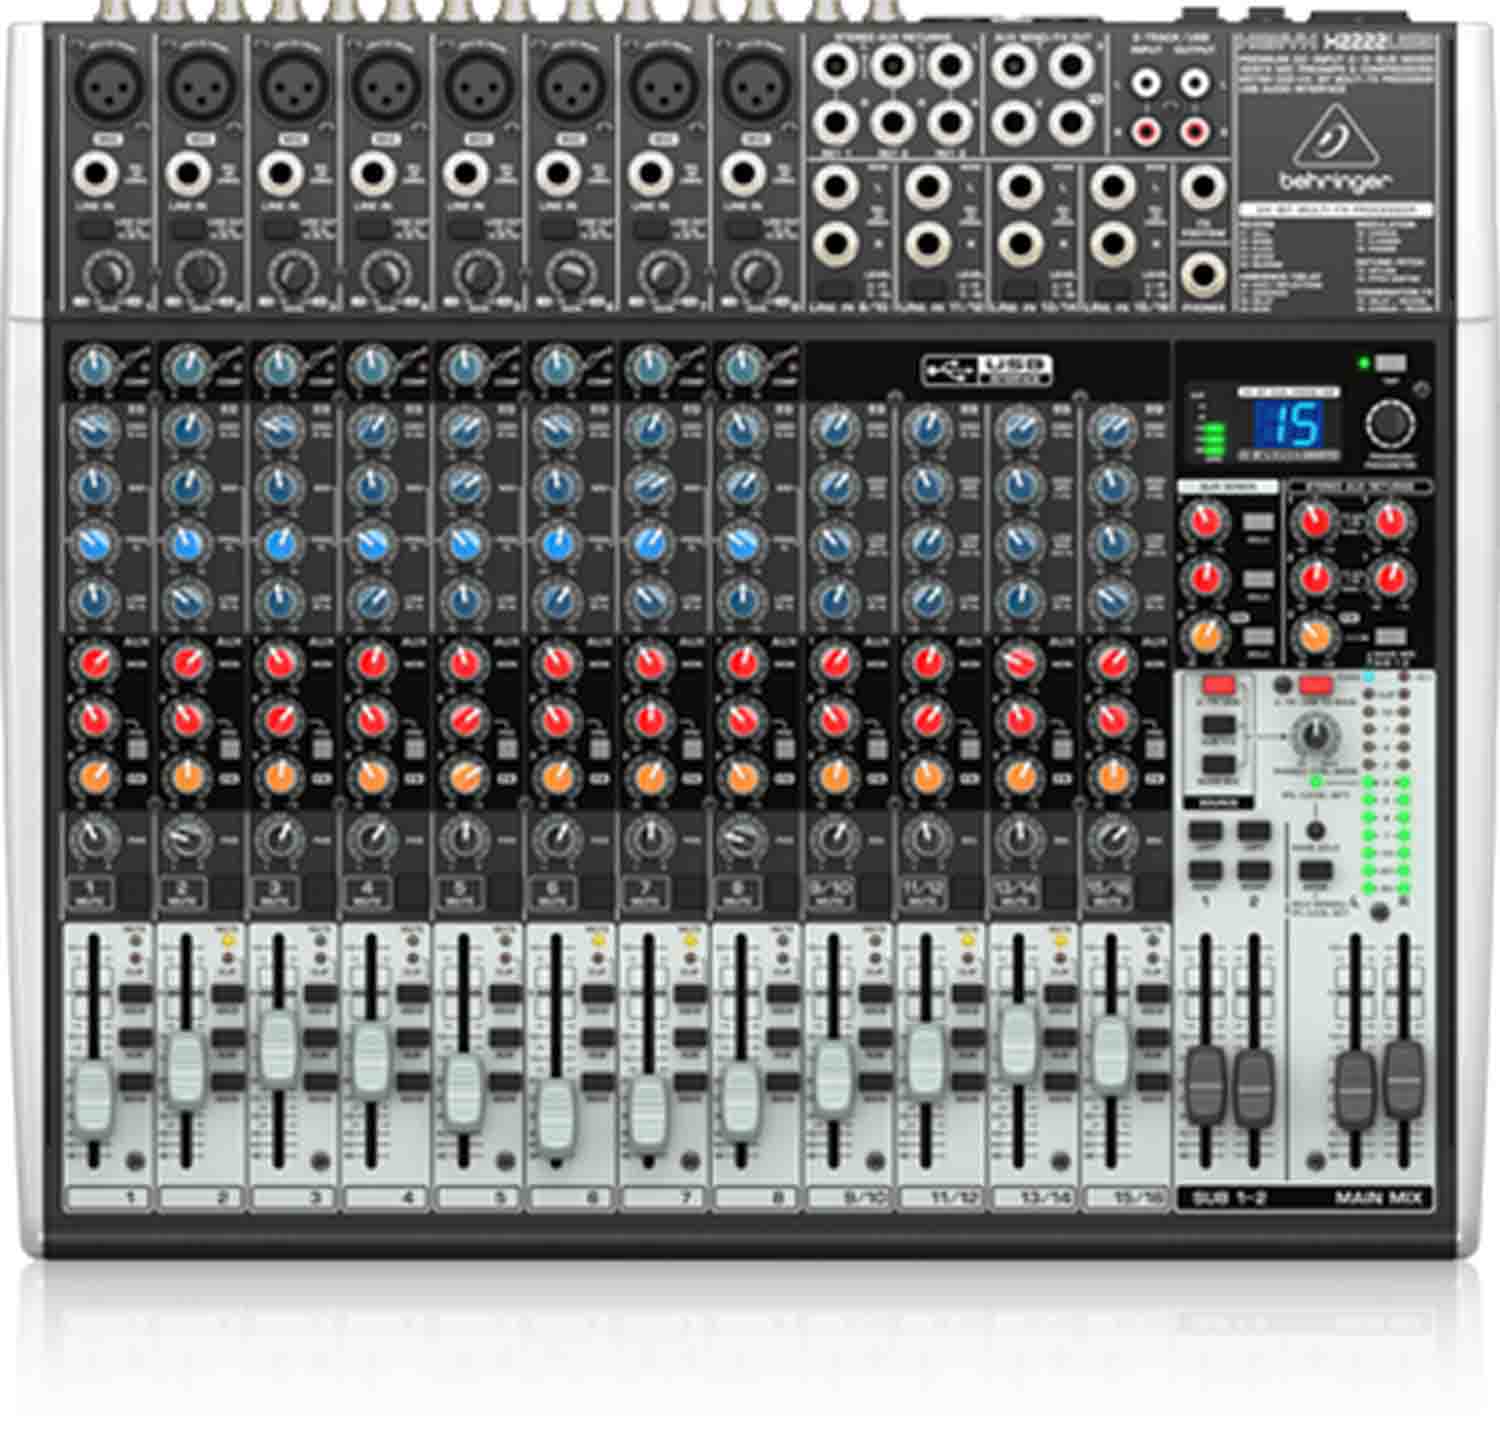 Behringer Premium 22-Input 2/2-Bus Mixer With XENYX Mic Preamps And Compressors - Hollywood DJ